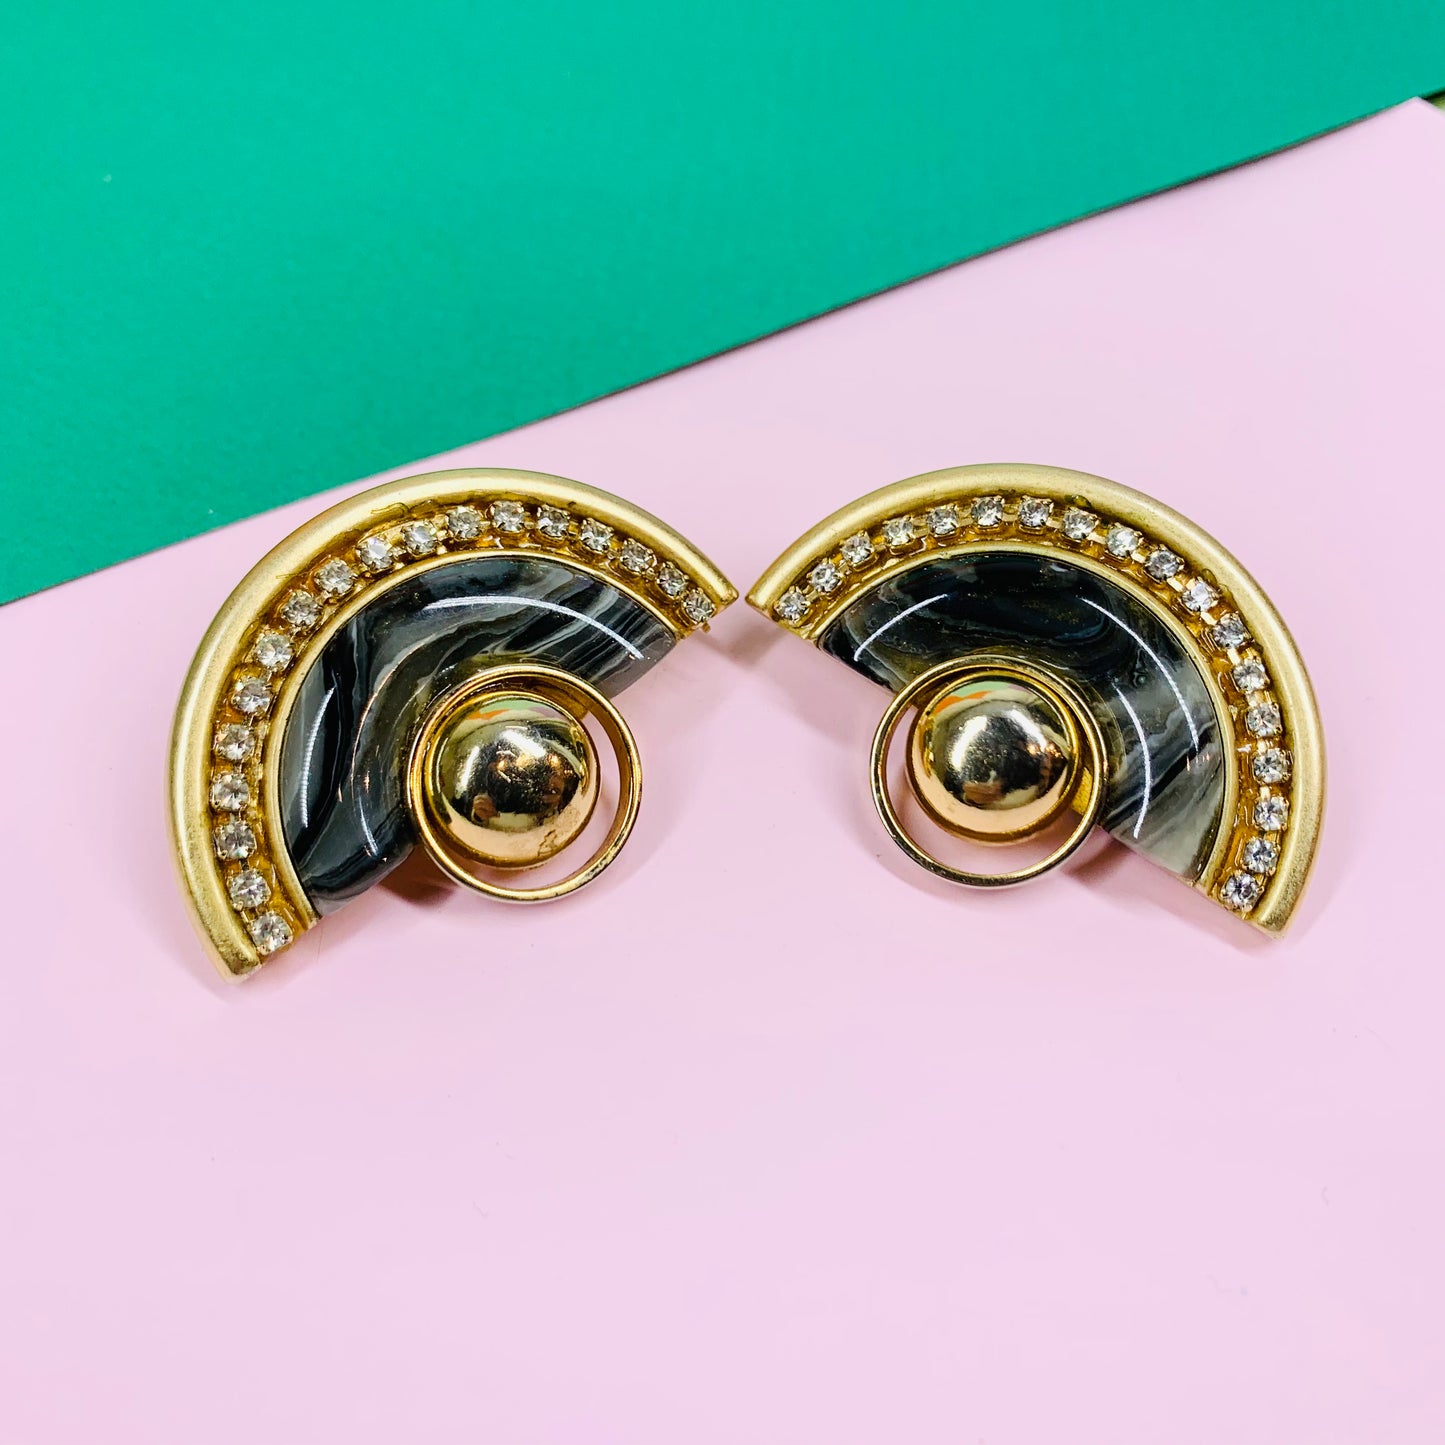 Extremely rare 1970s Egyptian revival fan rhinestone stud earrings